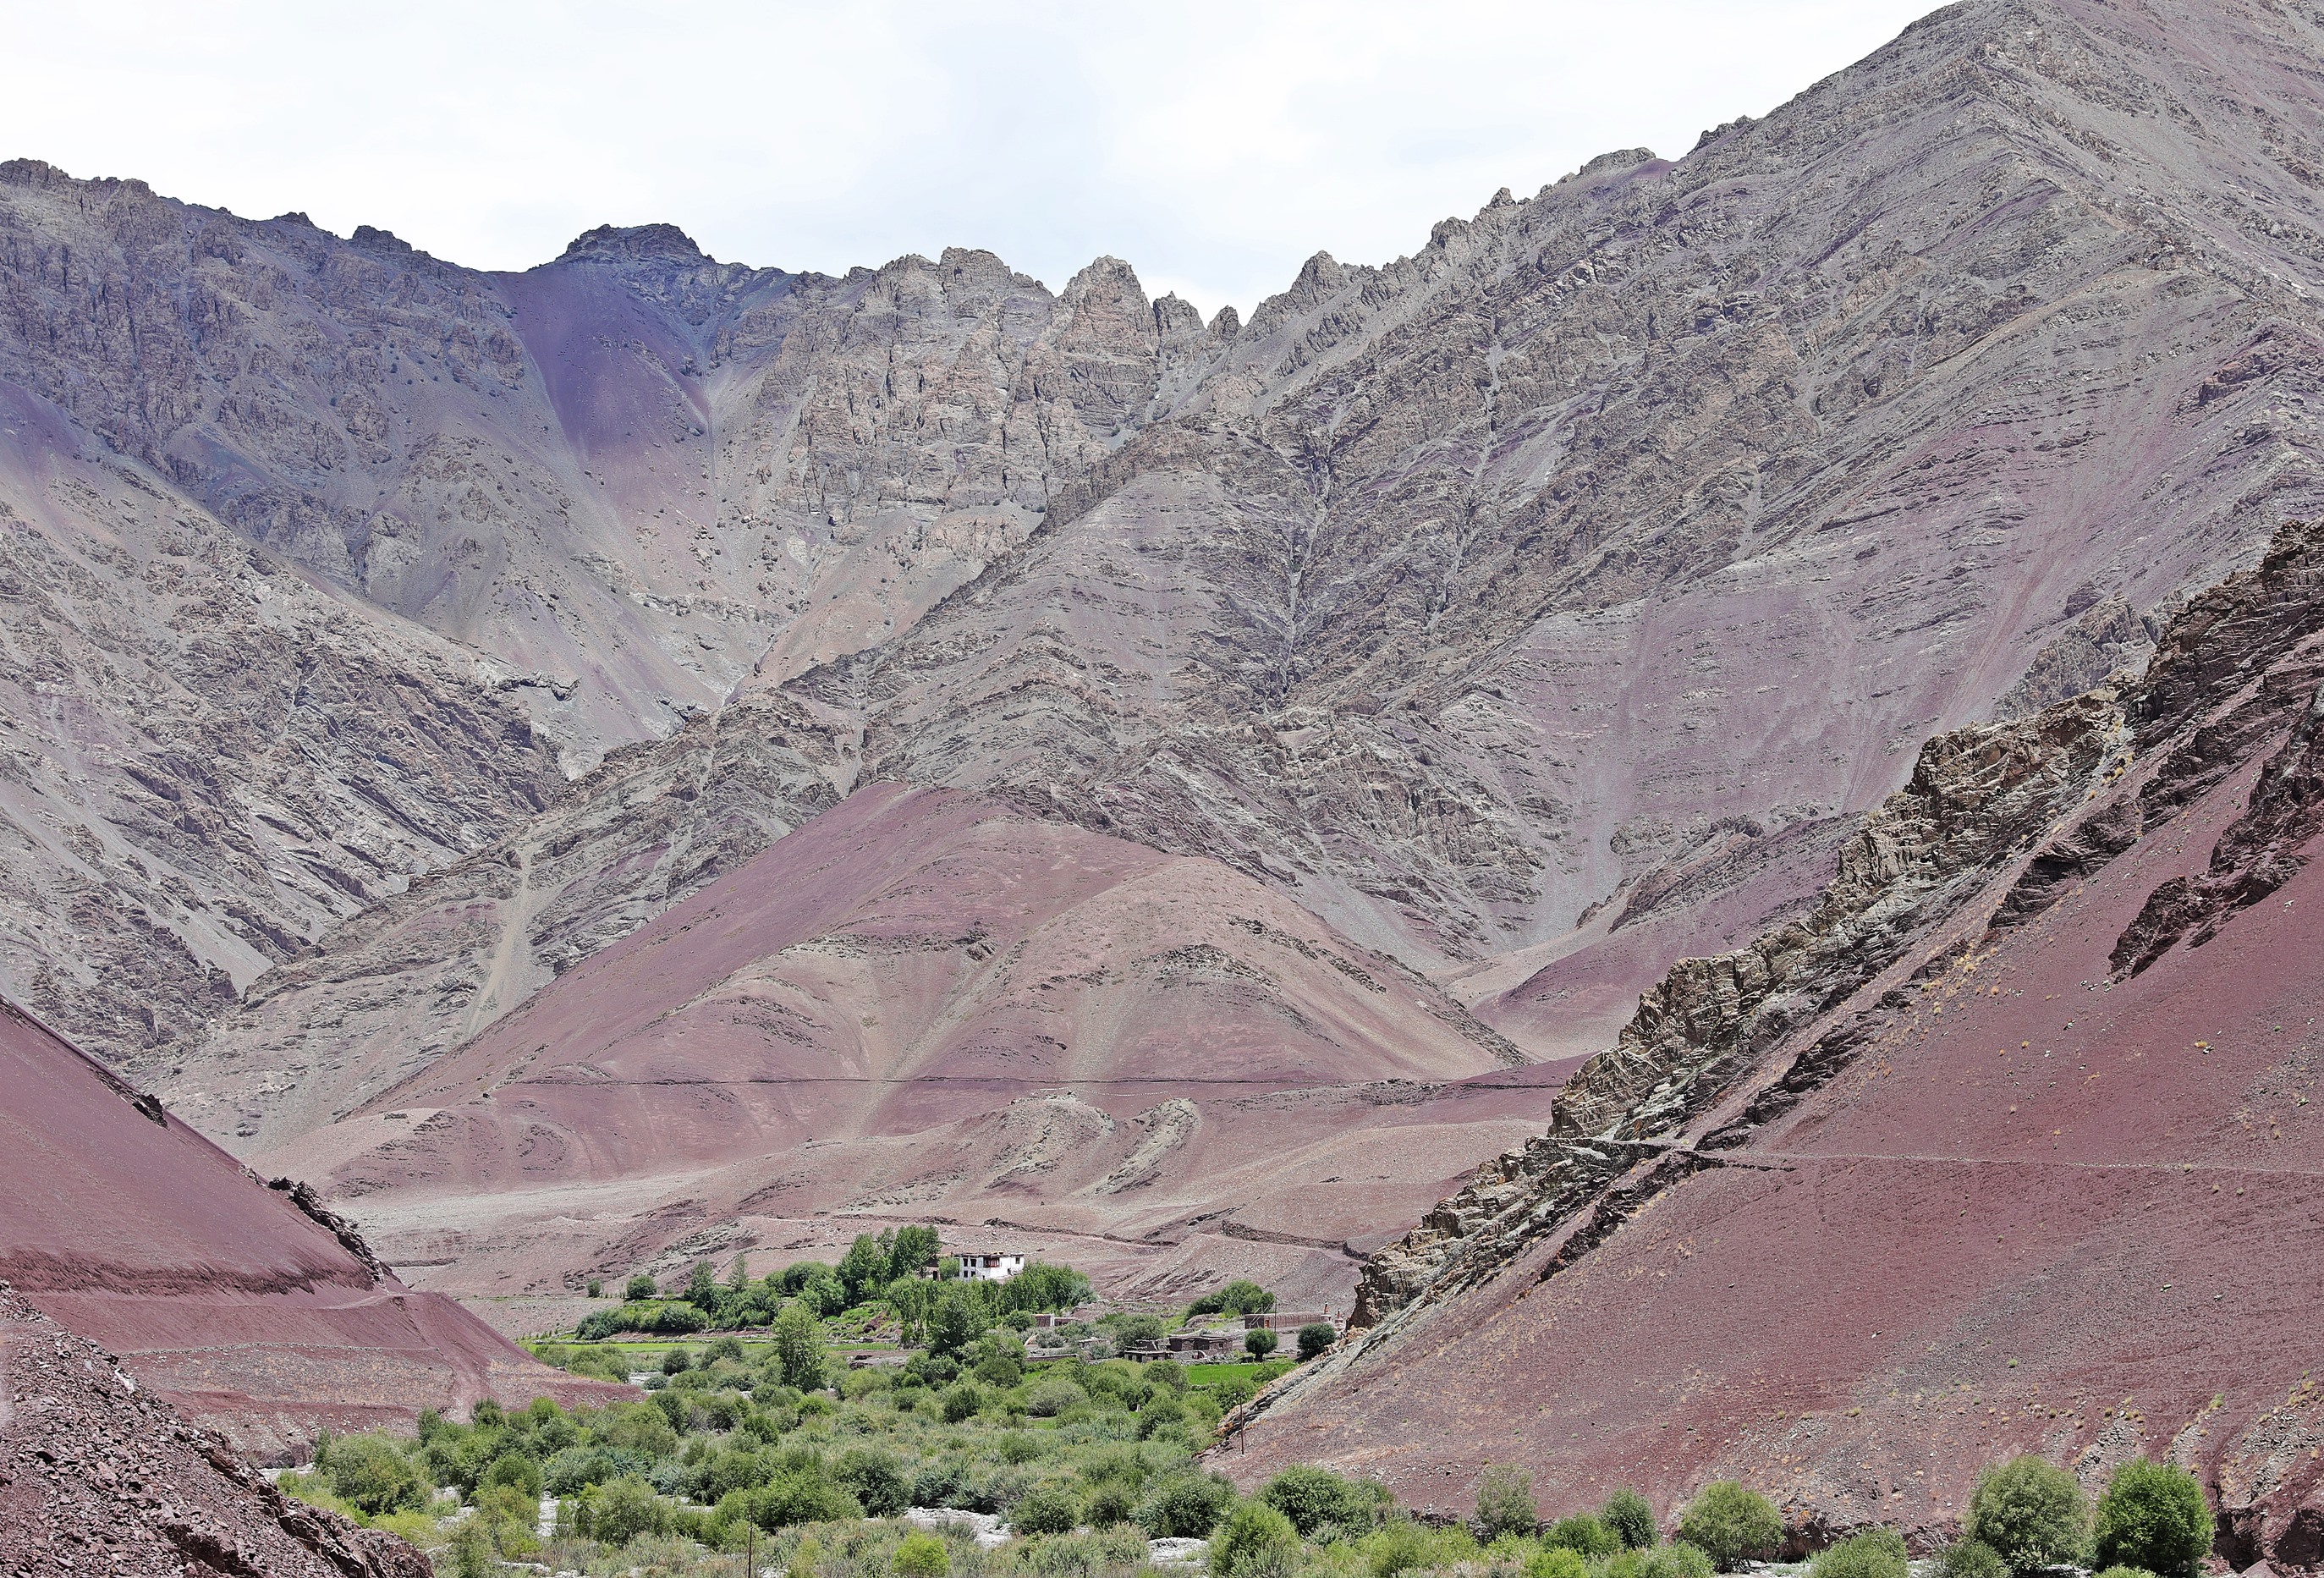 Colourful mountains around the village of Chogdo